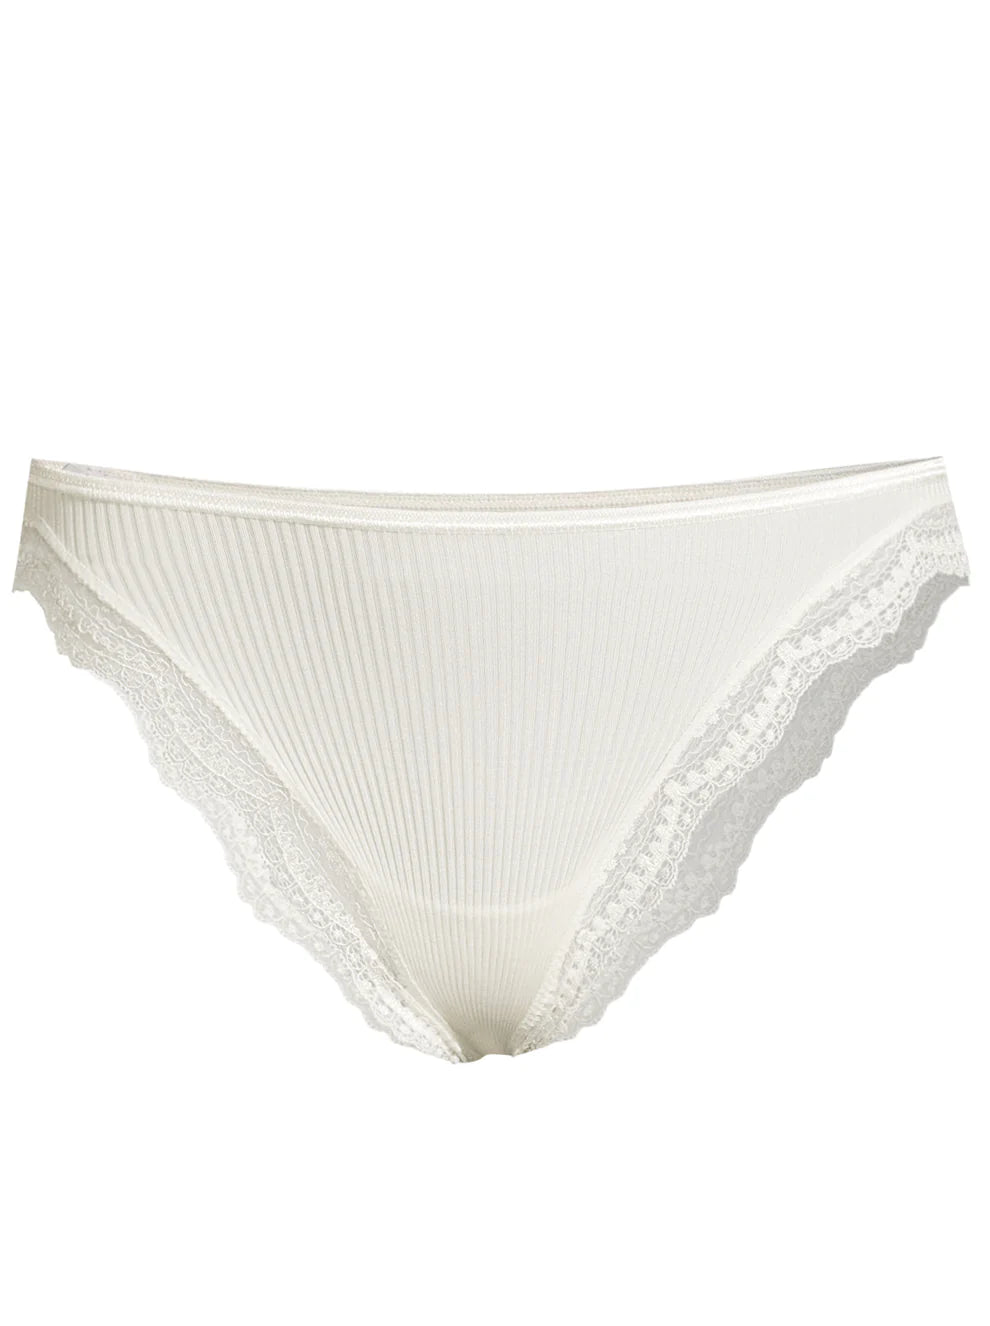 New Look Pure Silk French Knickers (In stock, 3 day delivery) – Susan Hunter